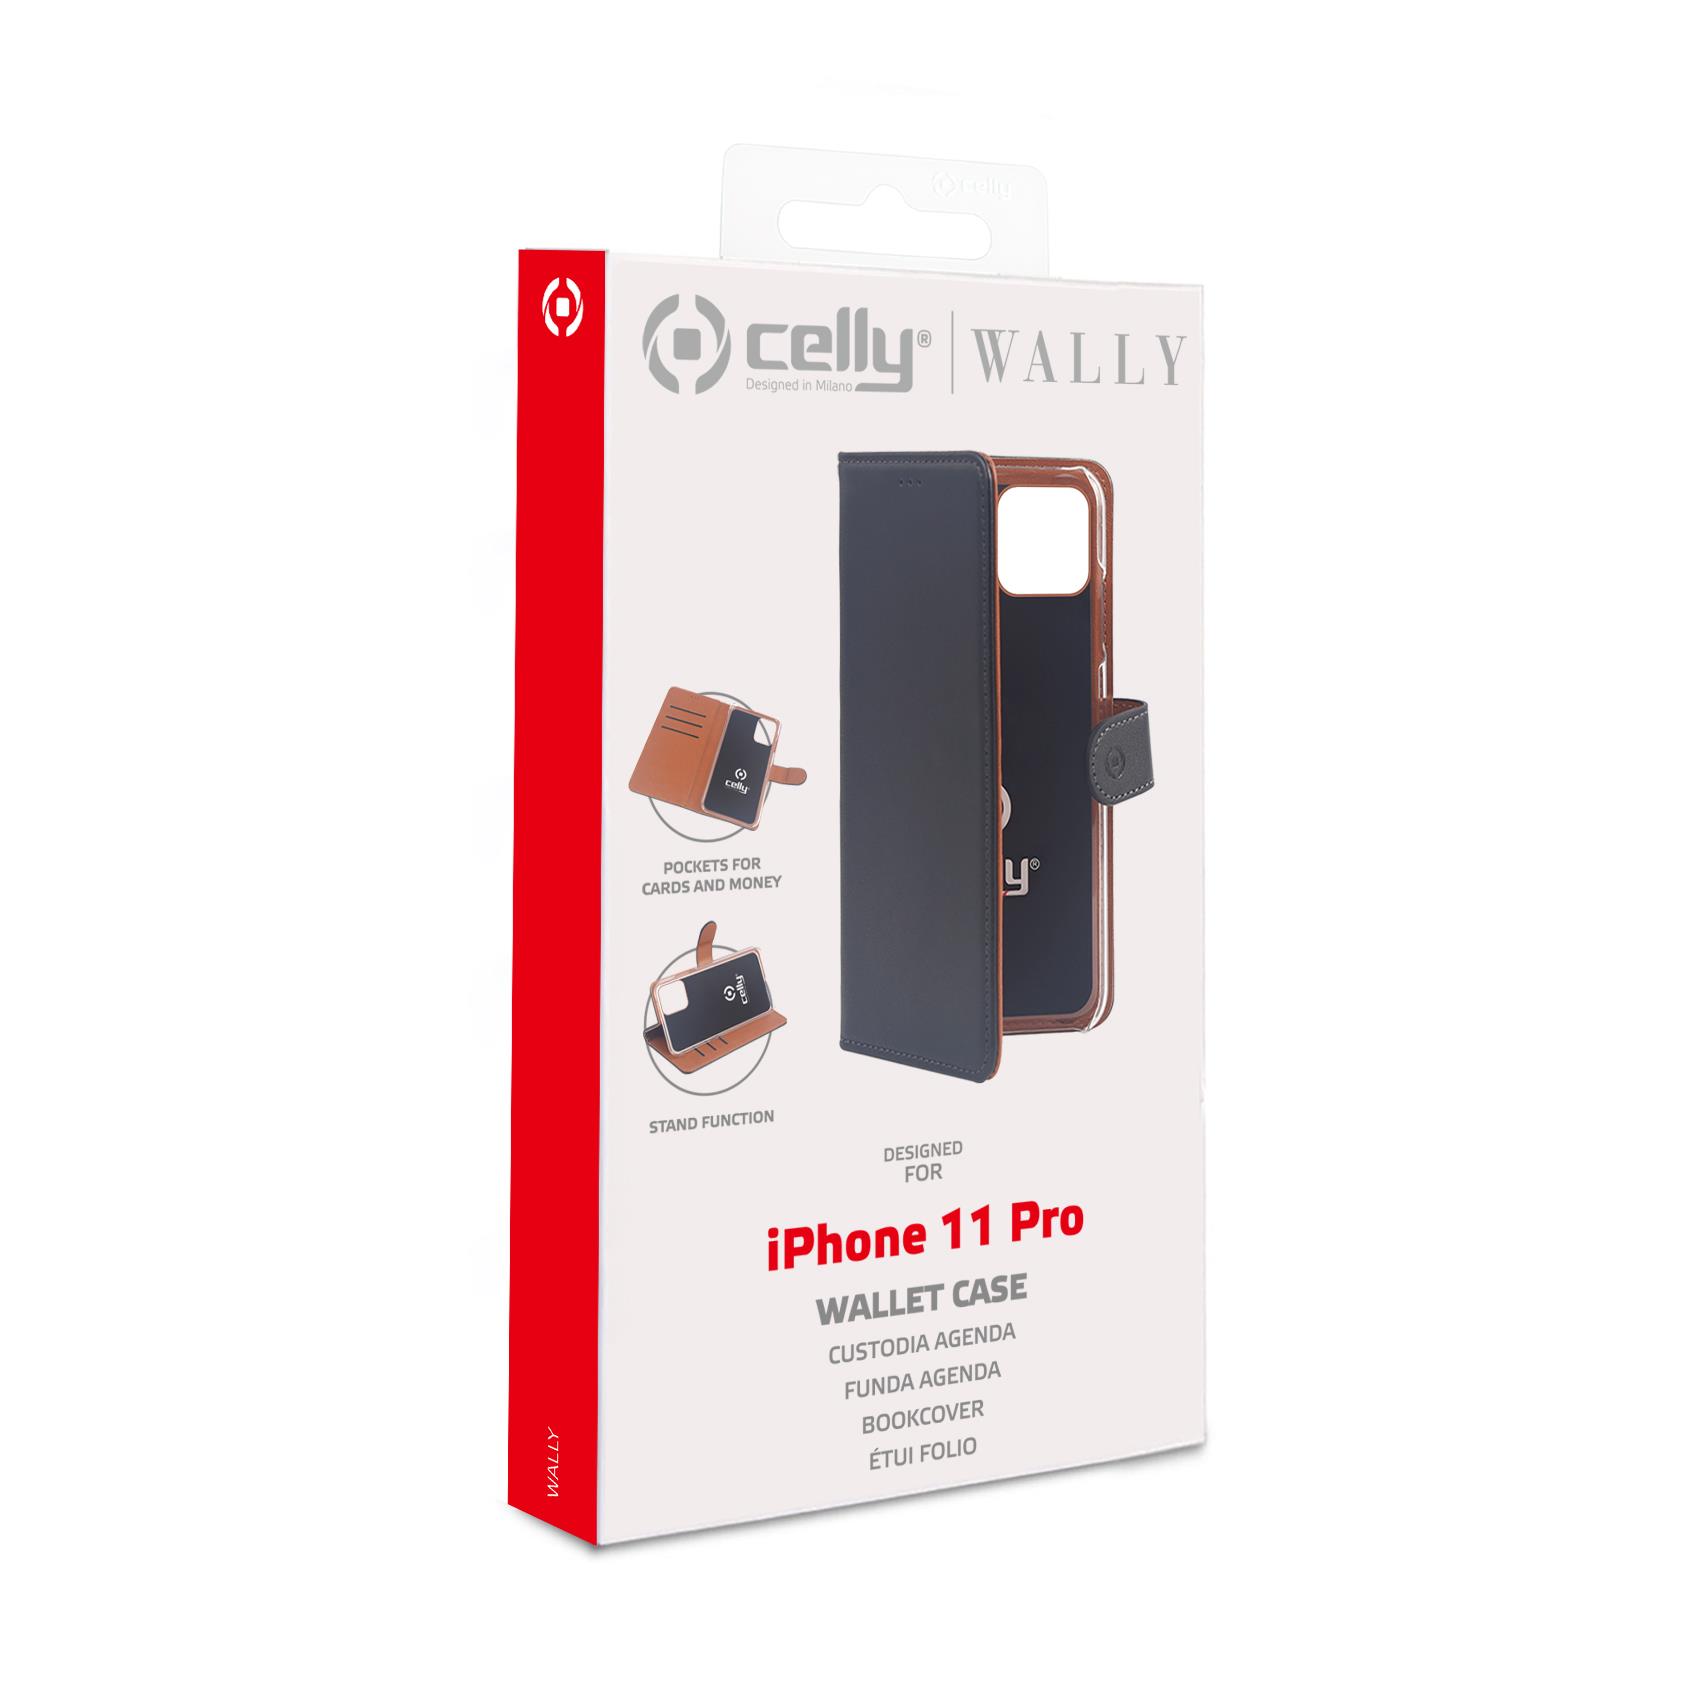 Wally Case Iphone 11 Pro Black Celly Wally1000 8021735752486